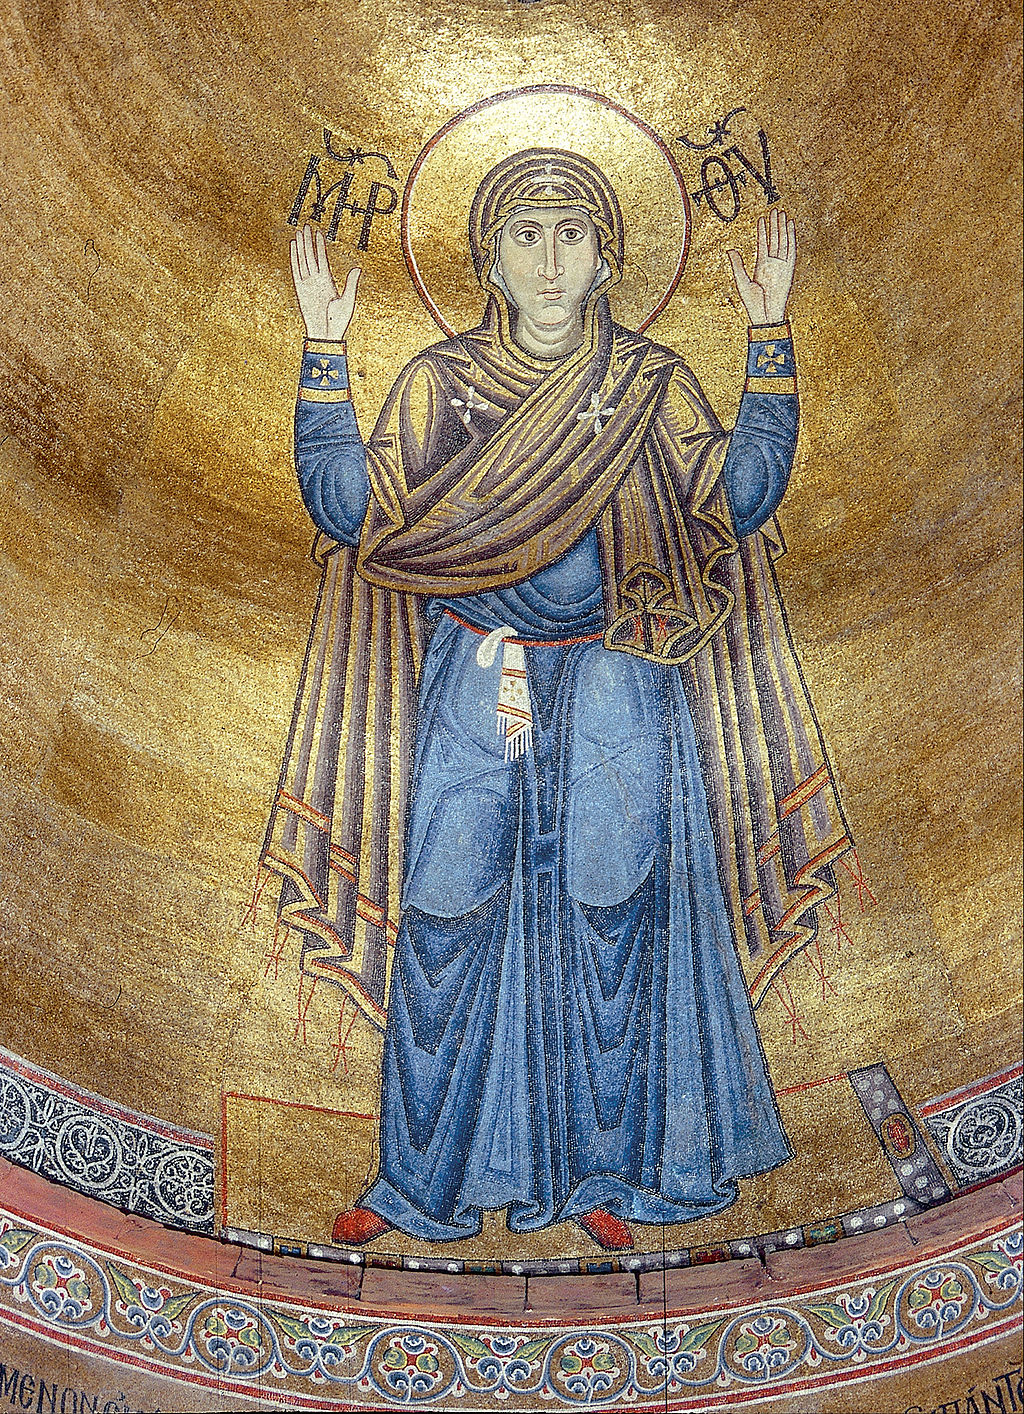 Mosaic of the Mother of God “Oranta” from Saint Sophia (Holy Wisdom) Cathedral in Kyiv.